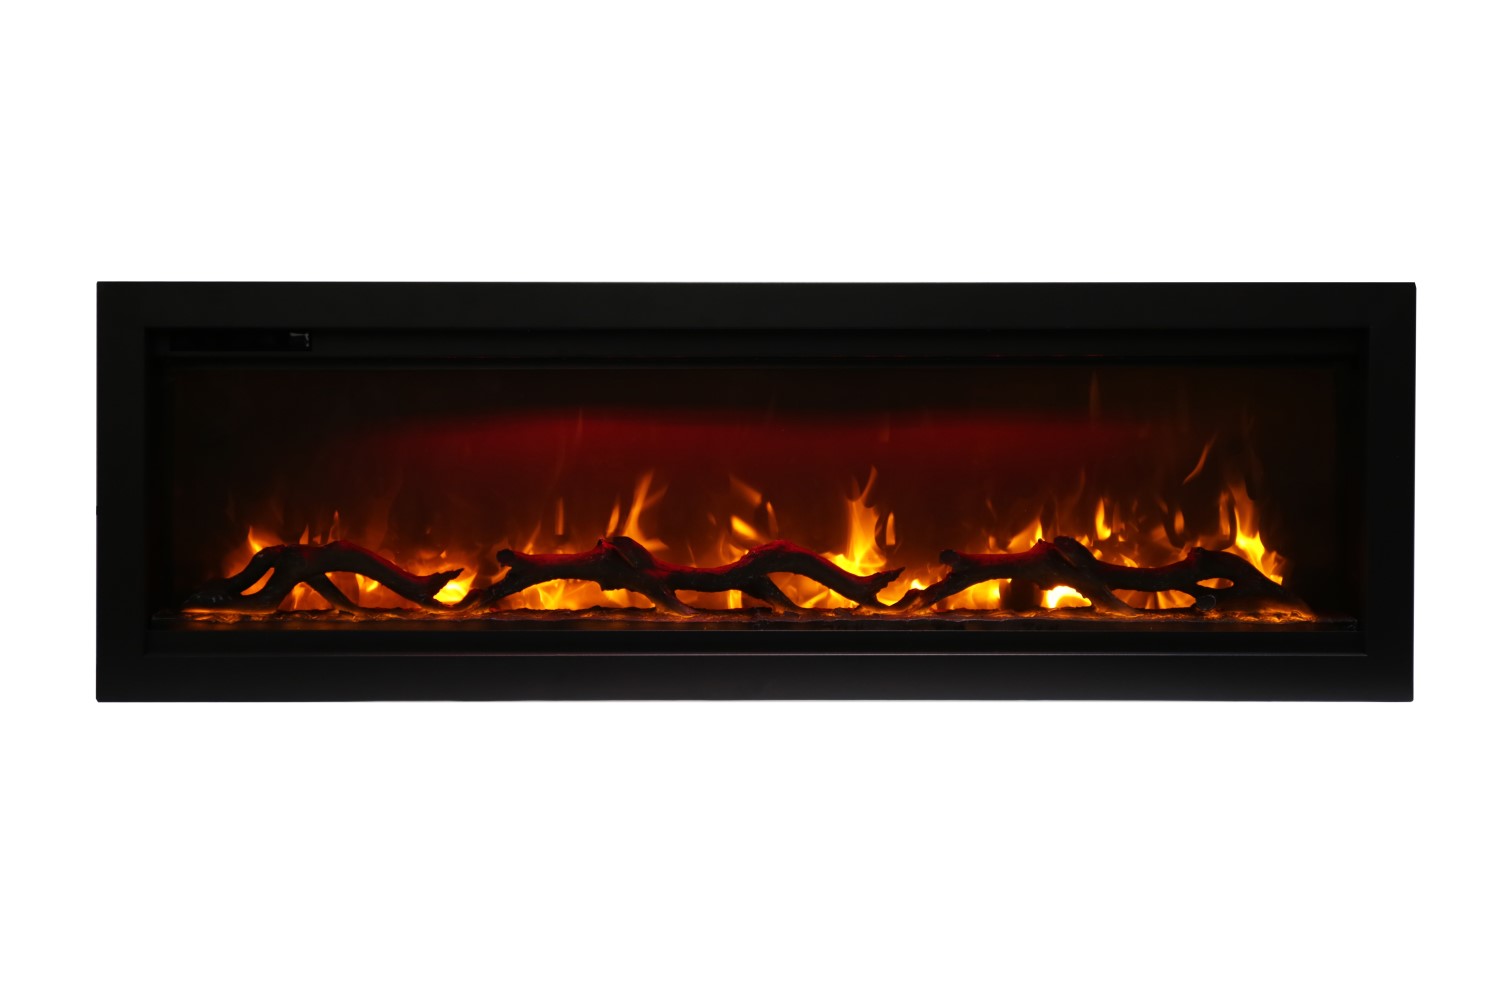 Image Ambiance Impressionist® 50 inches electrical fireplace                                                                                                